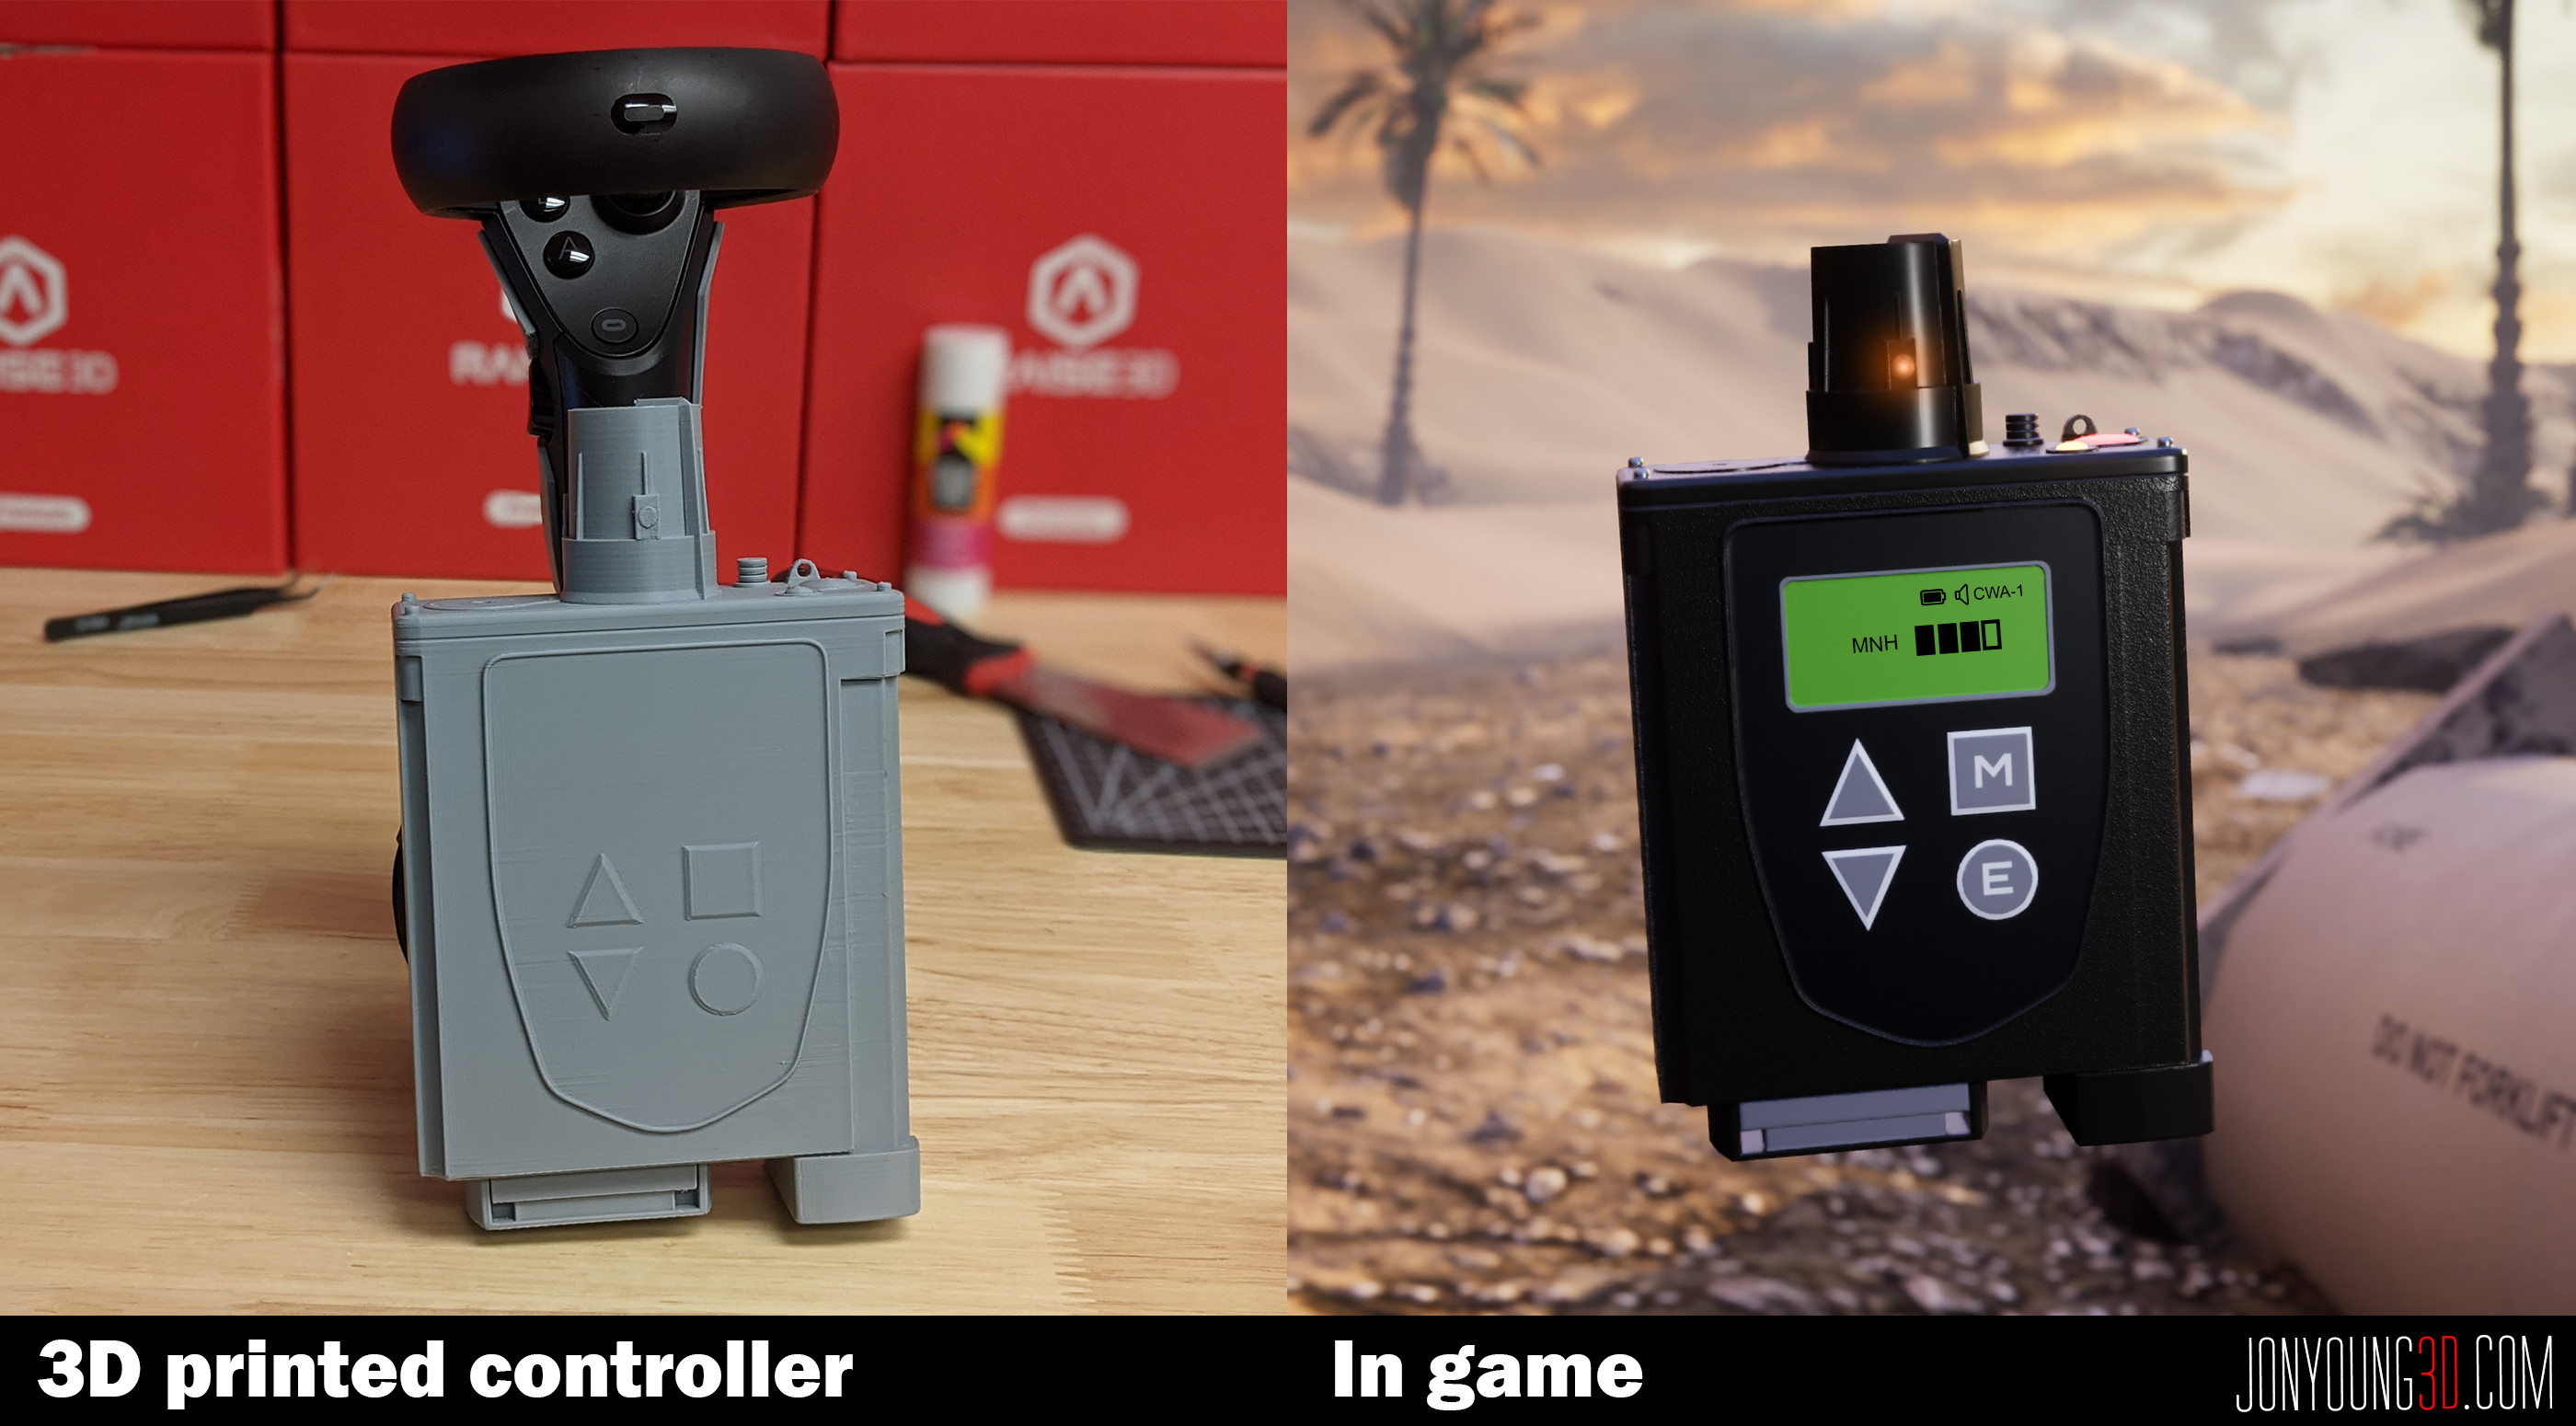 I converted this game mesh to be 3D printable and designed an integrated Quest controller holder so the user could hold the facsimile of the device for increased immersion.